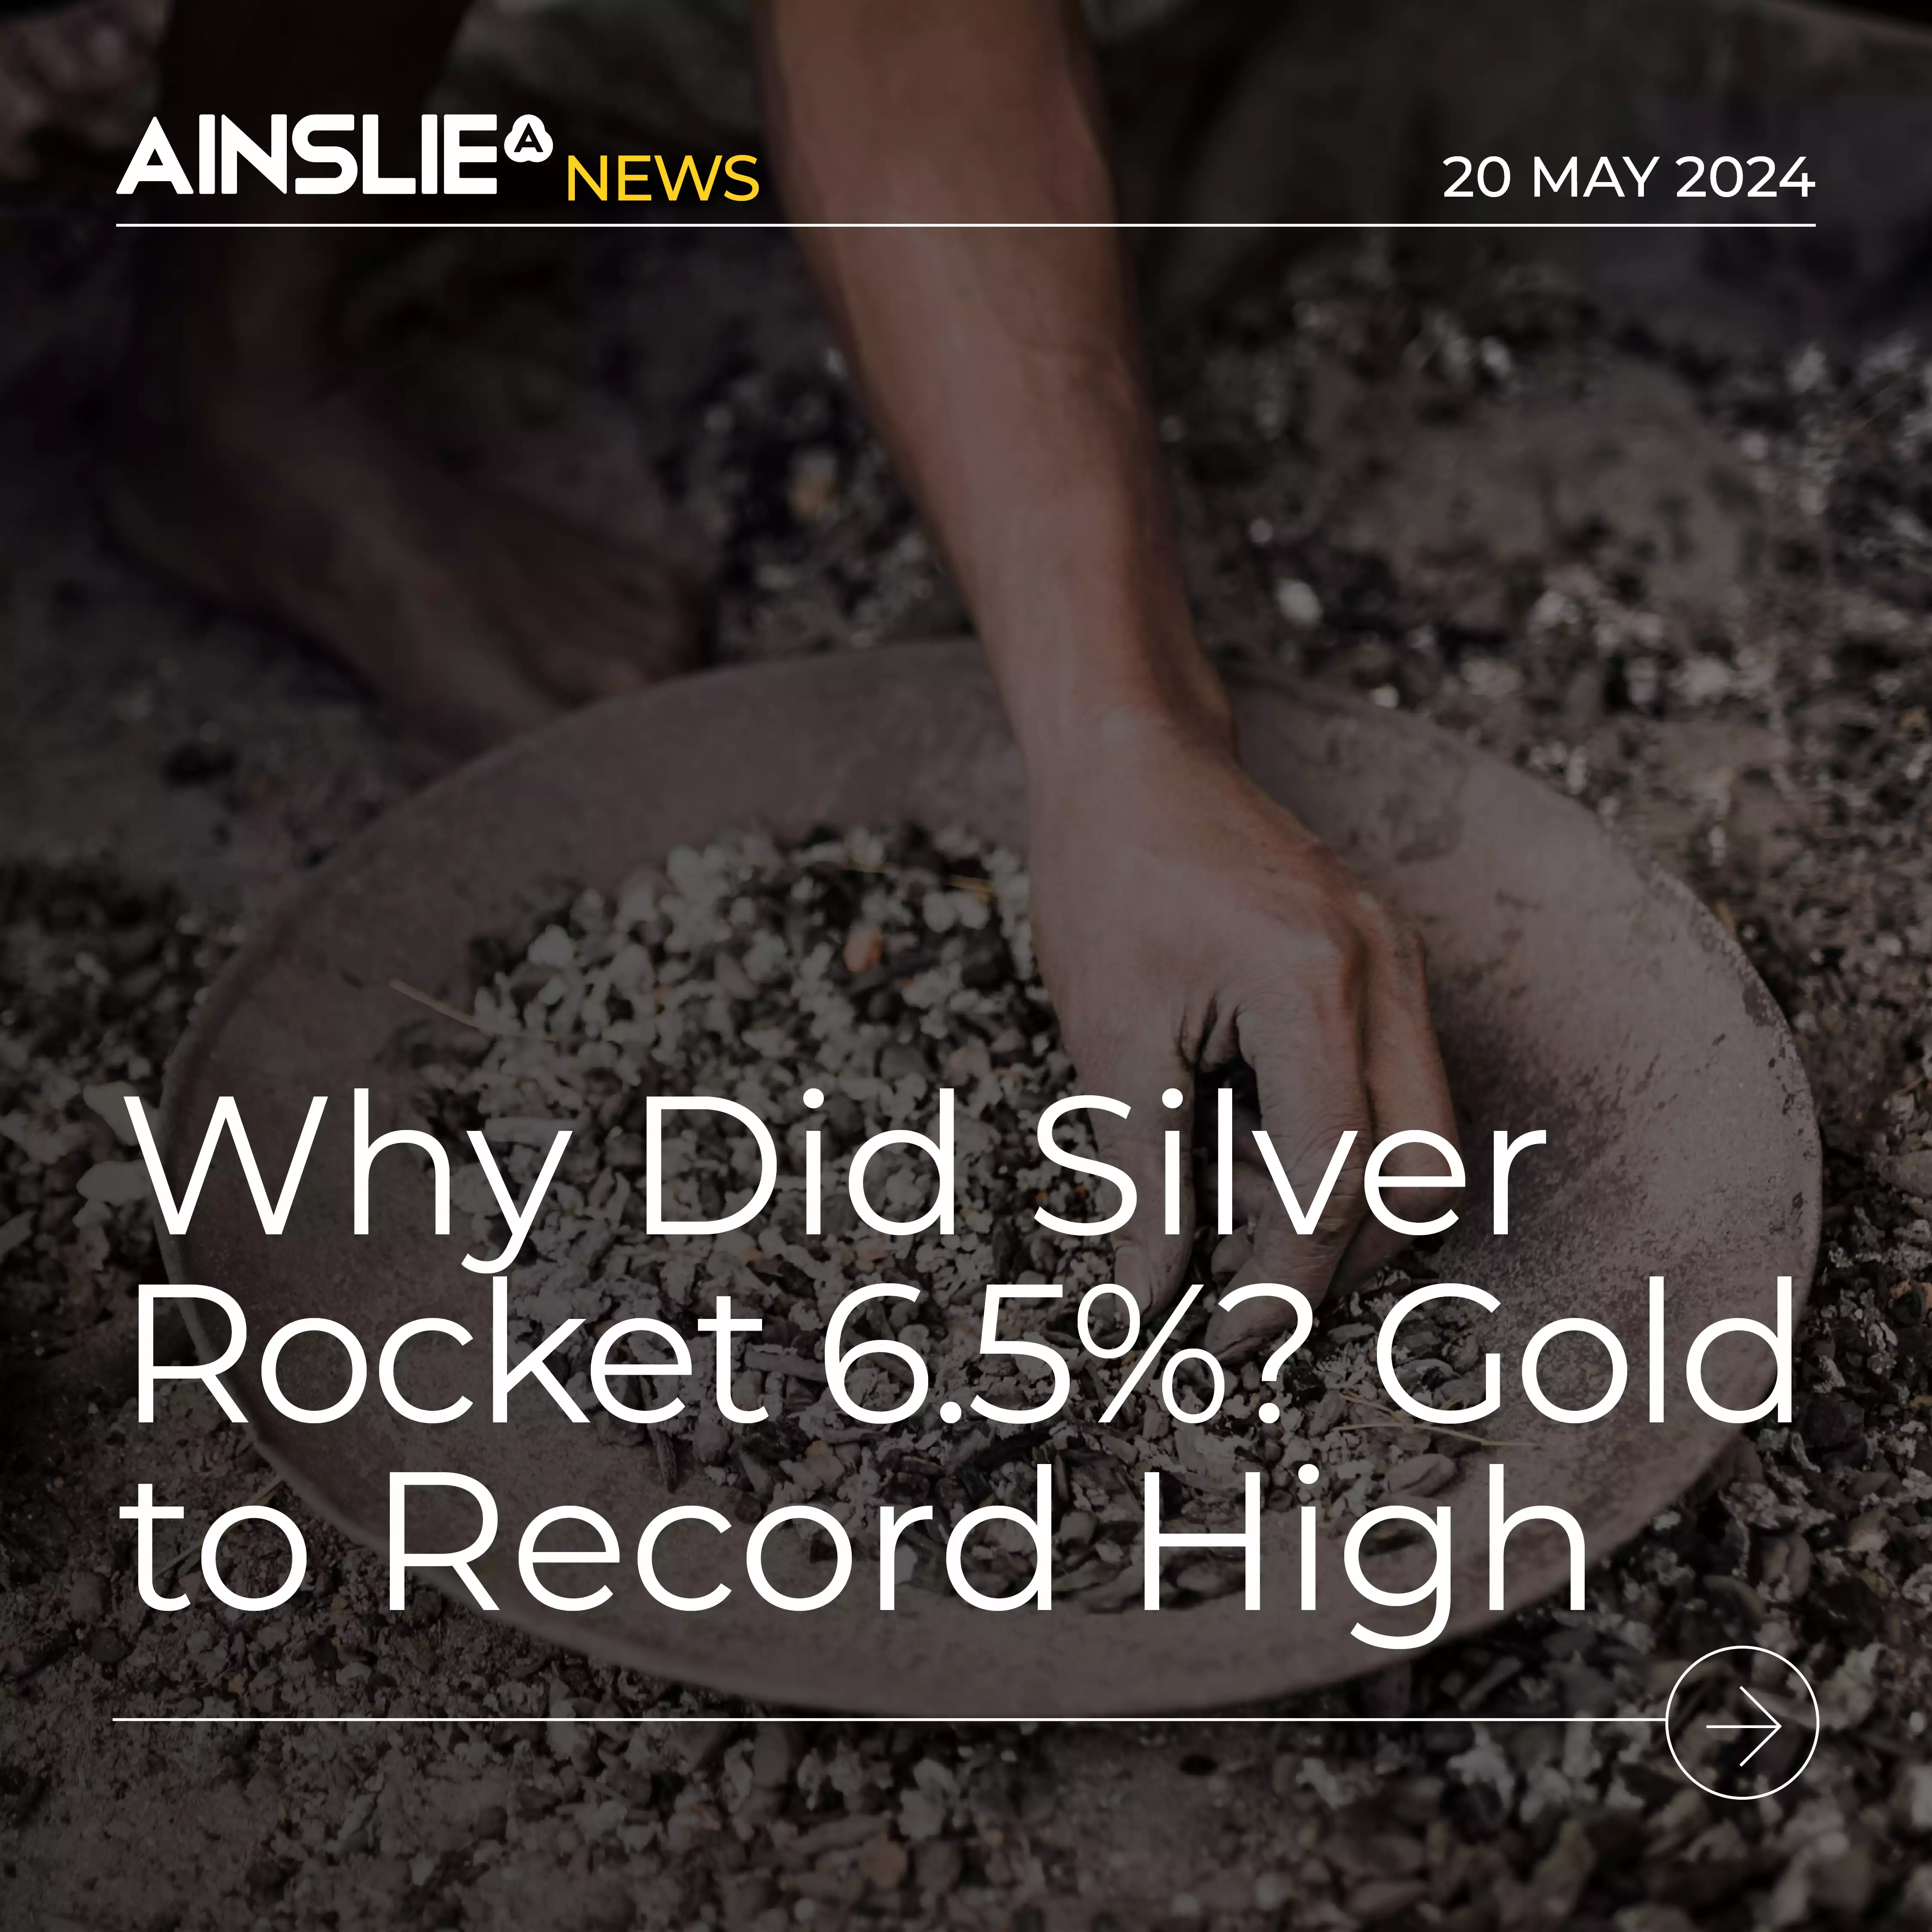 Why Did Silver Rocket 6.5%? Gold to Record High